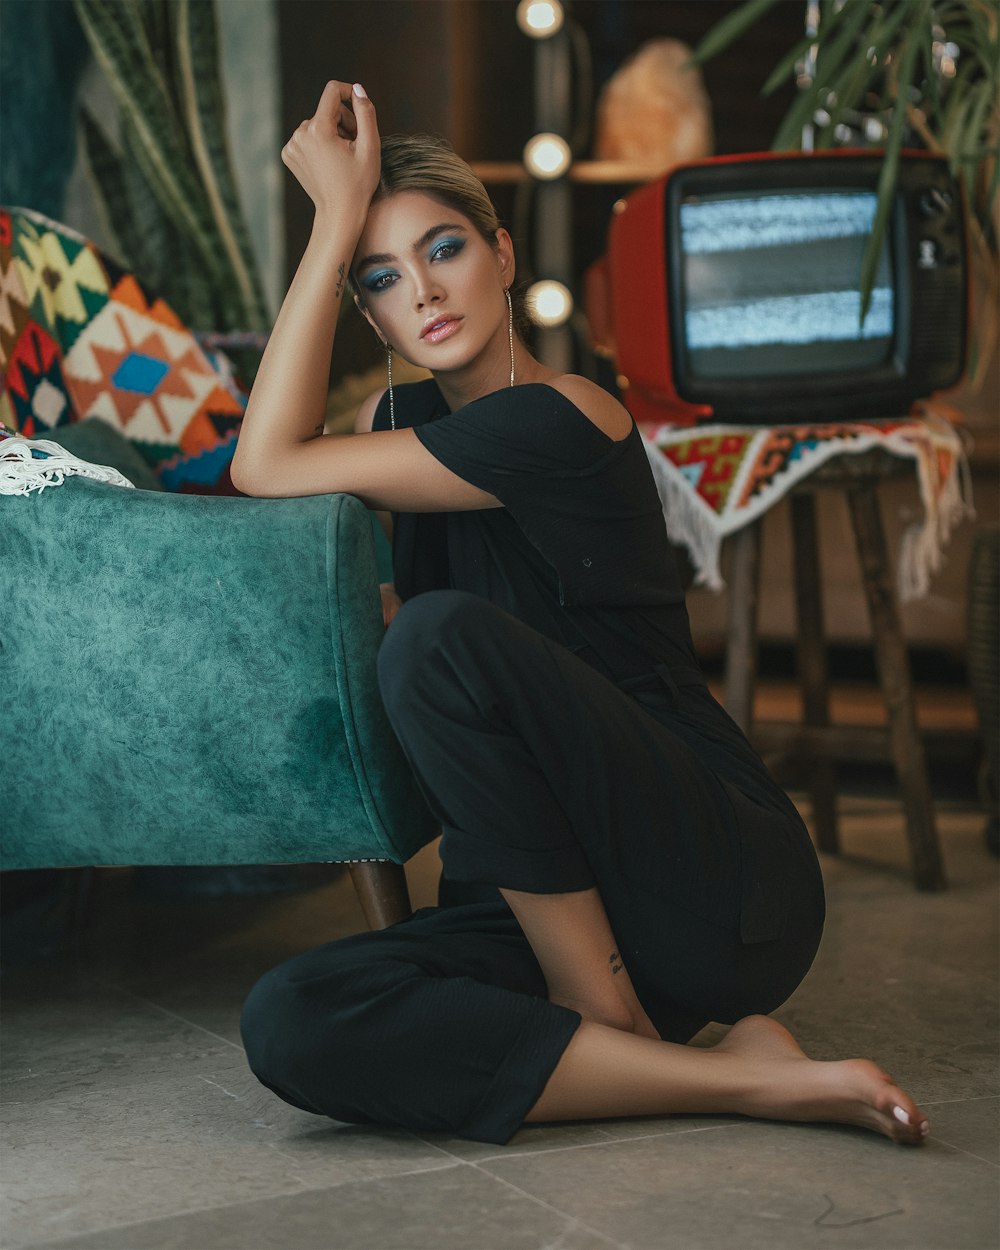 woman in black dress sitting on chair